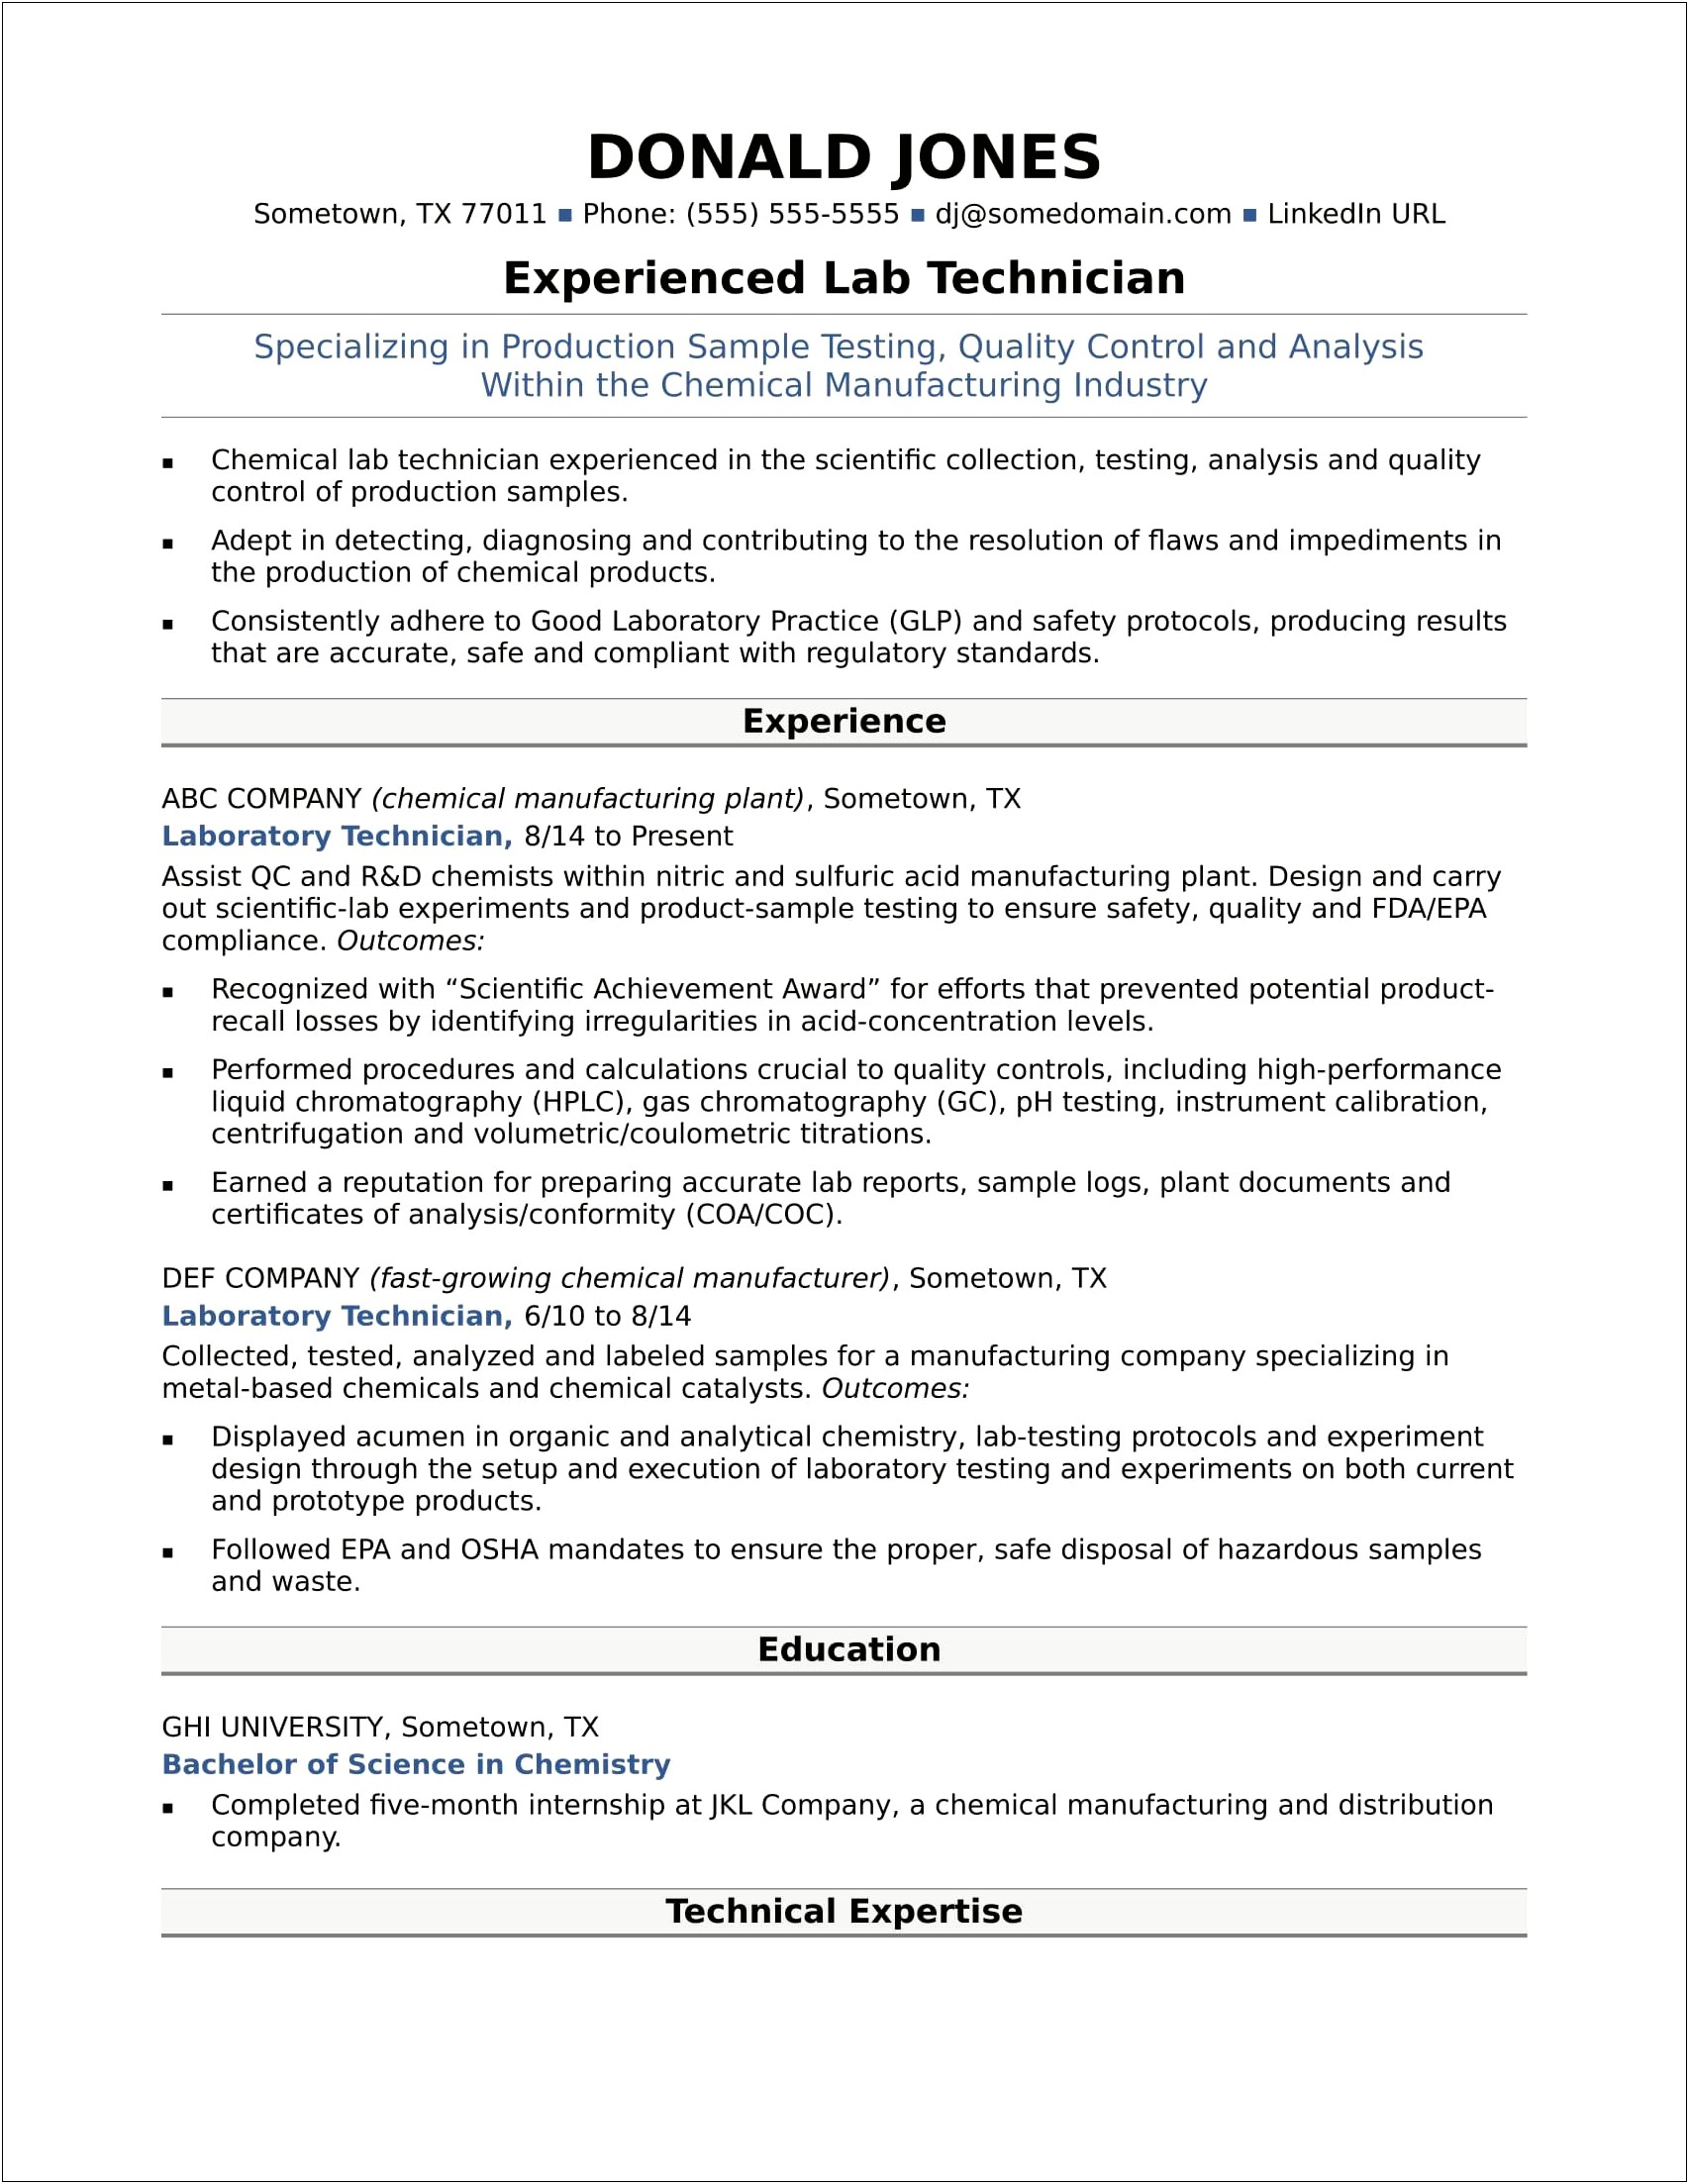 Chemical Engineer Resume With Lab Experience